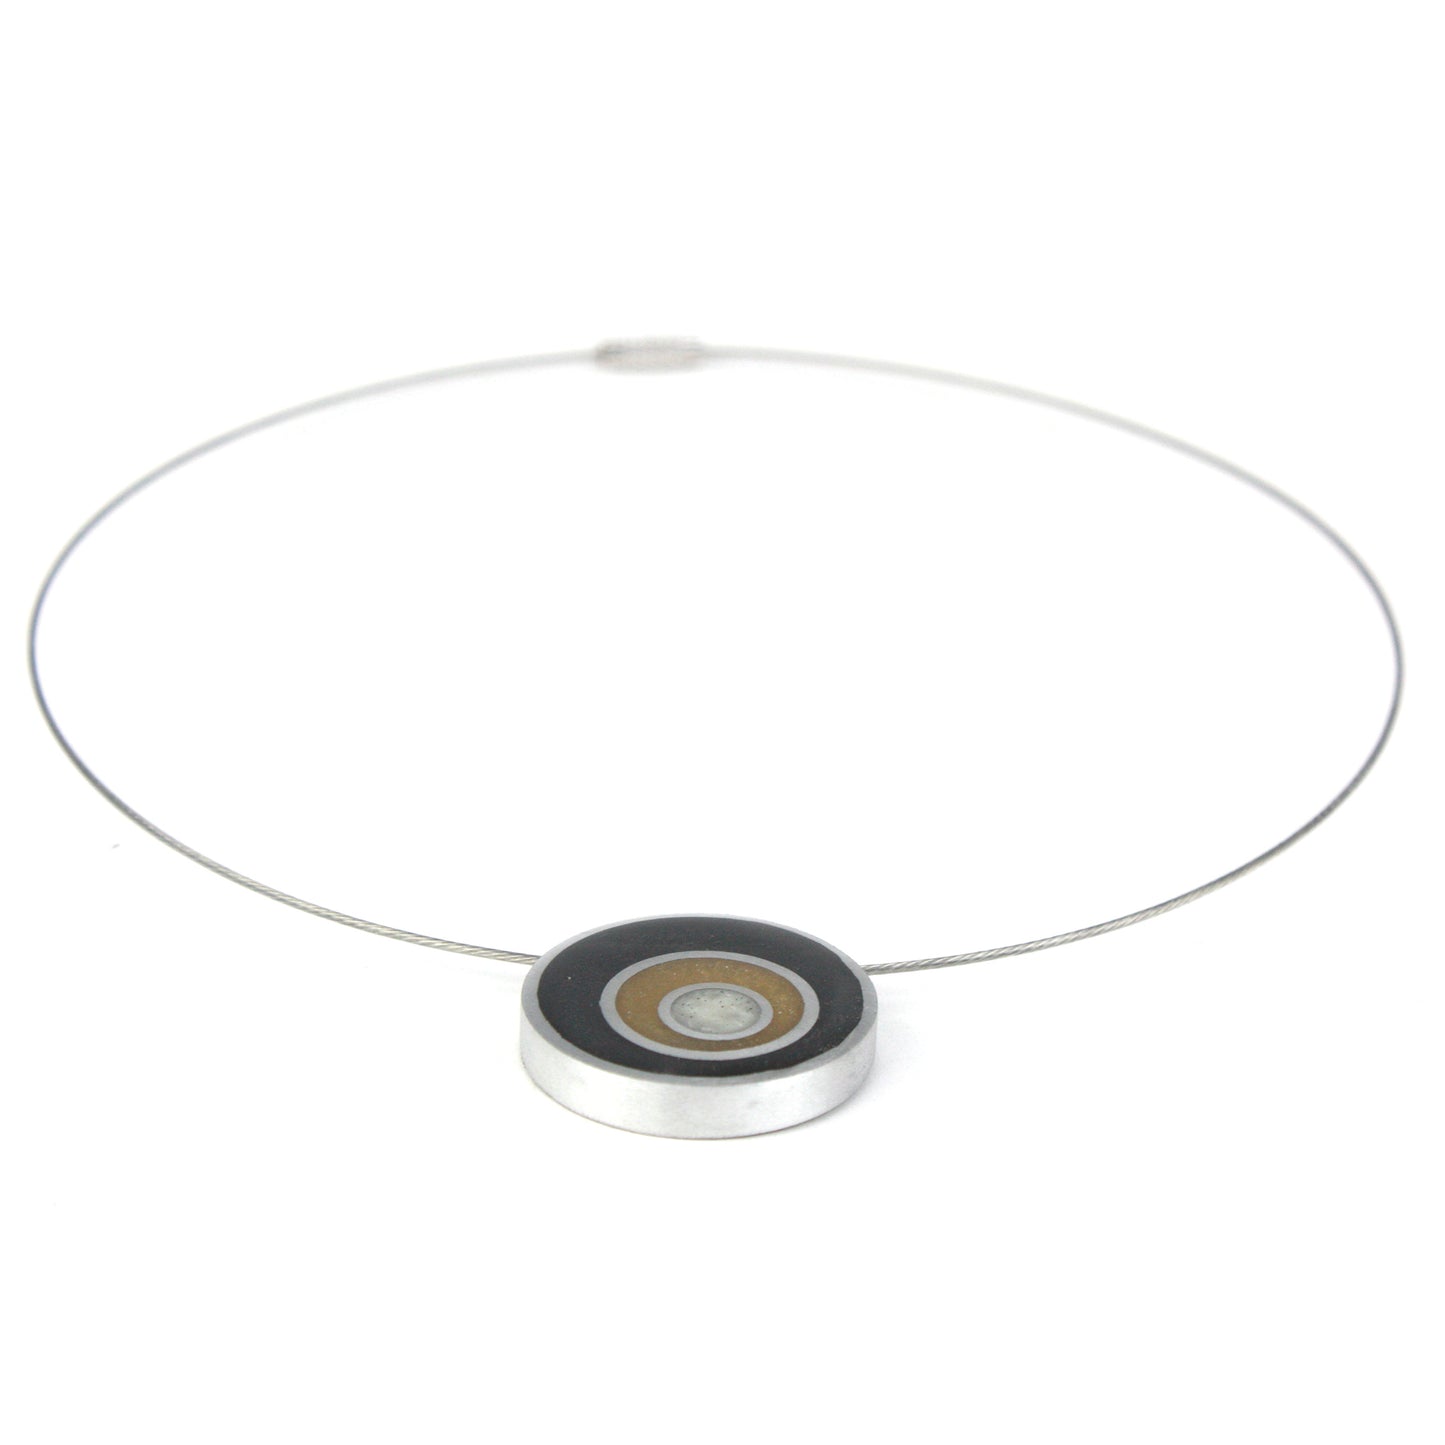 Resinique triple circle necklace - Black, gold and white